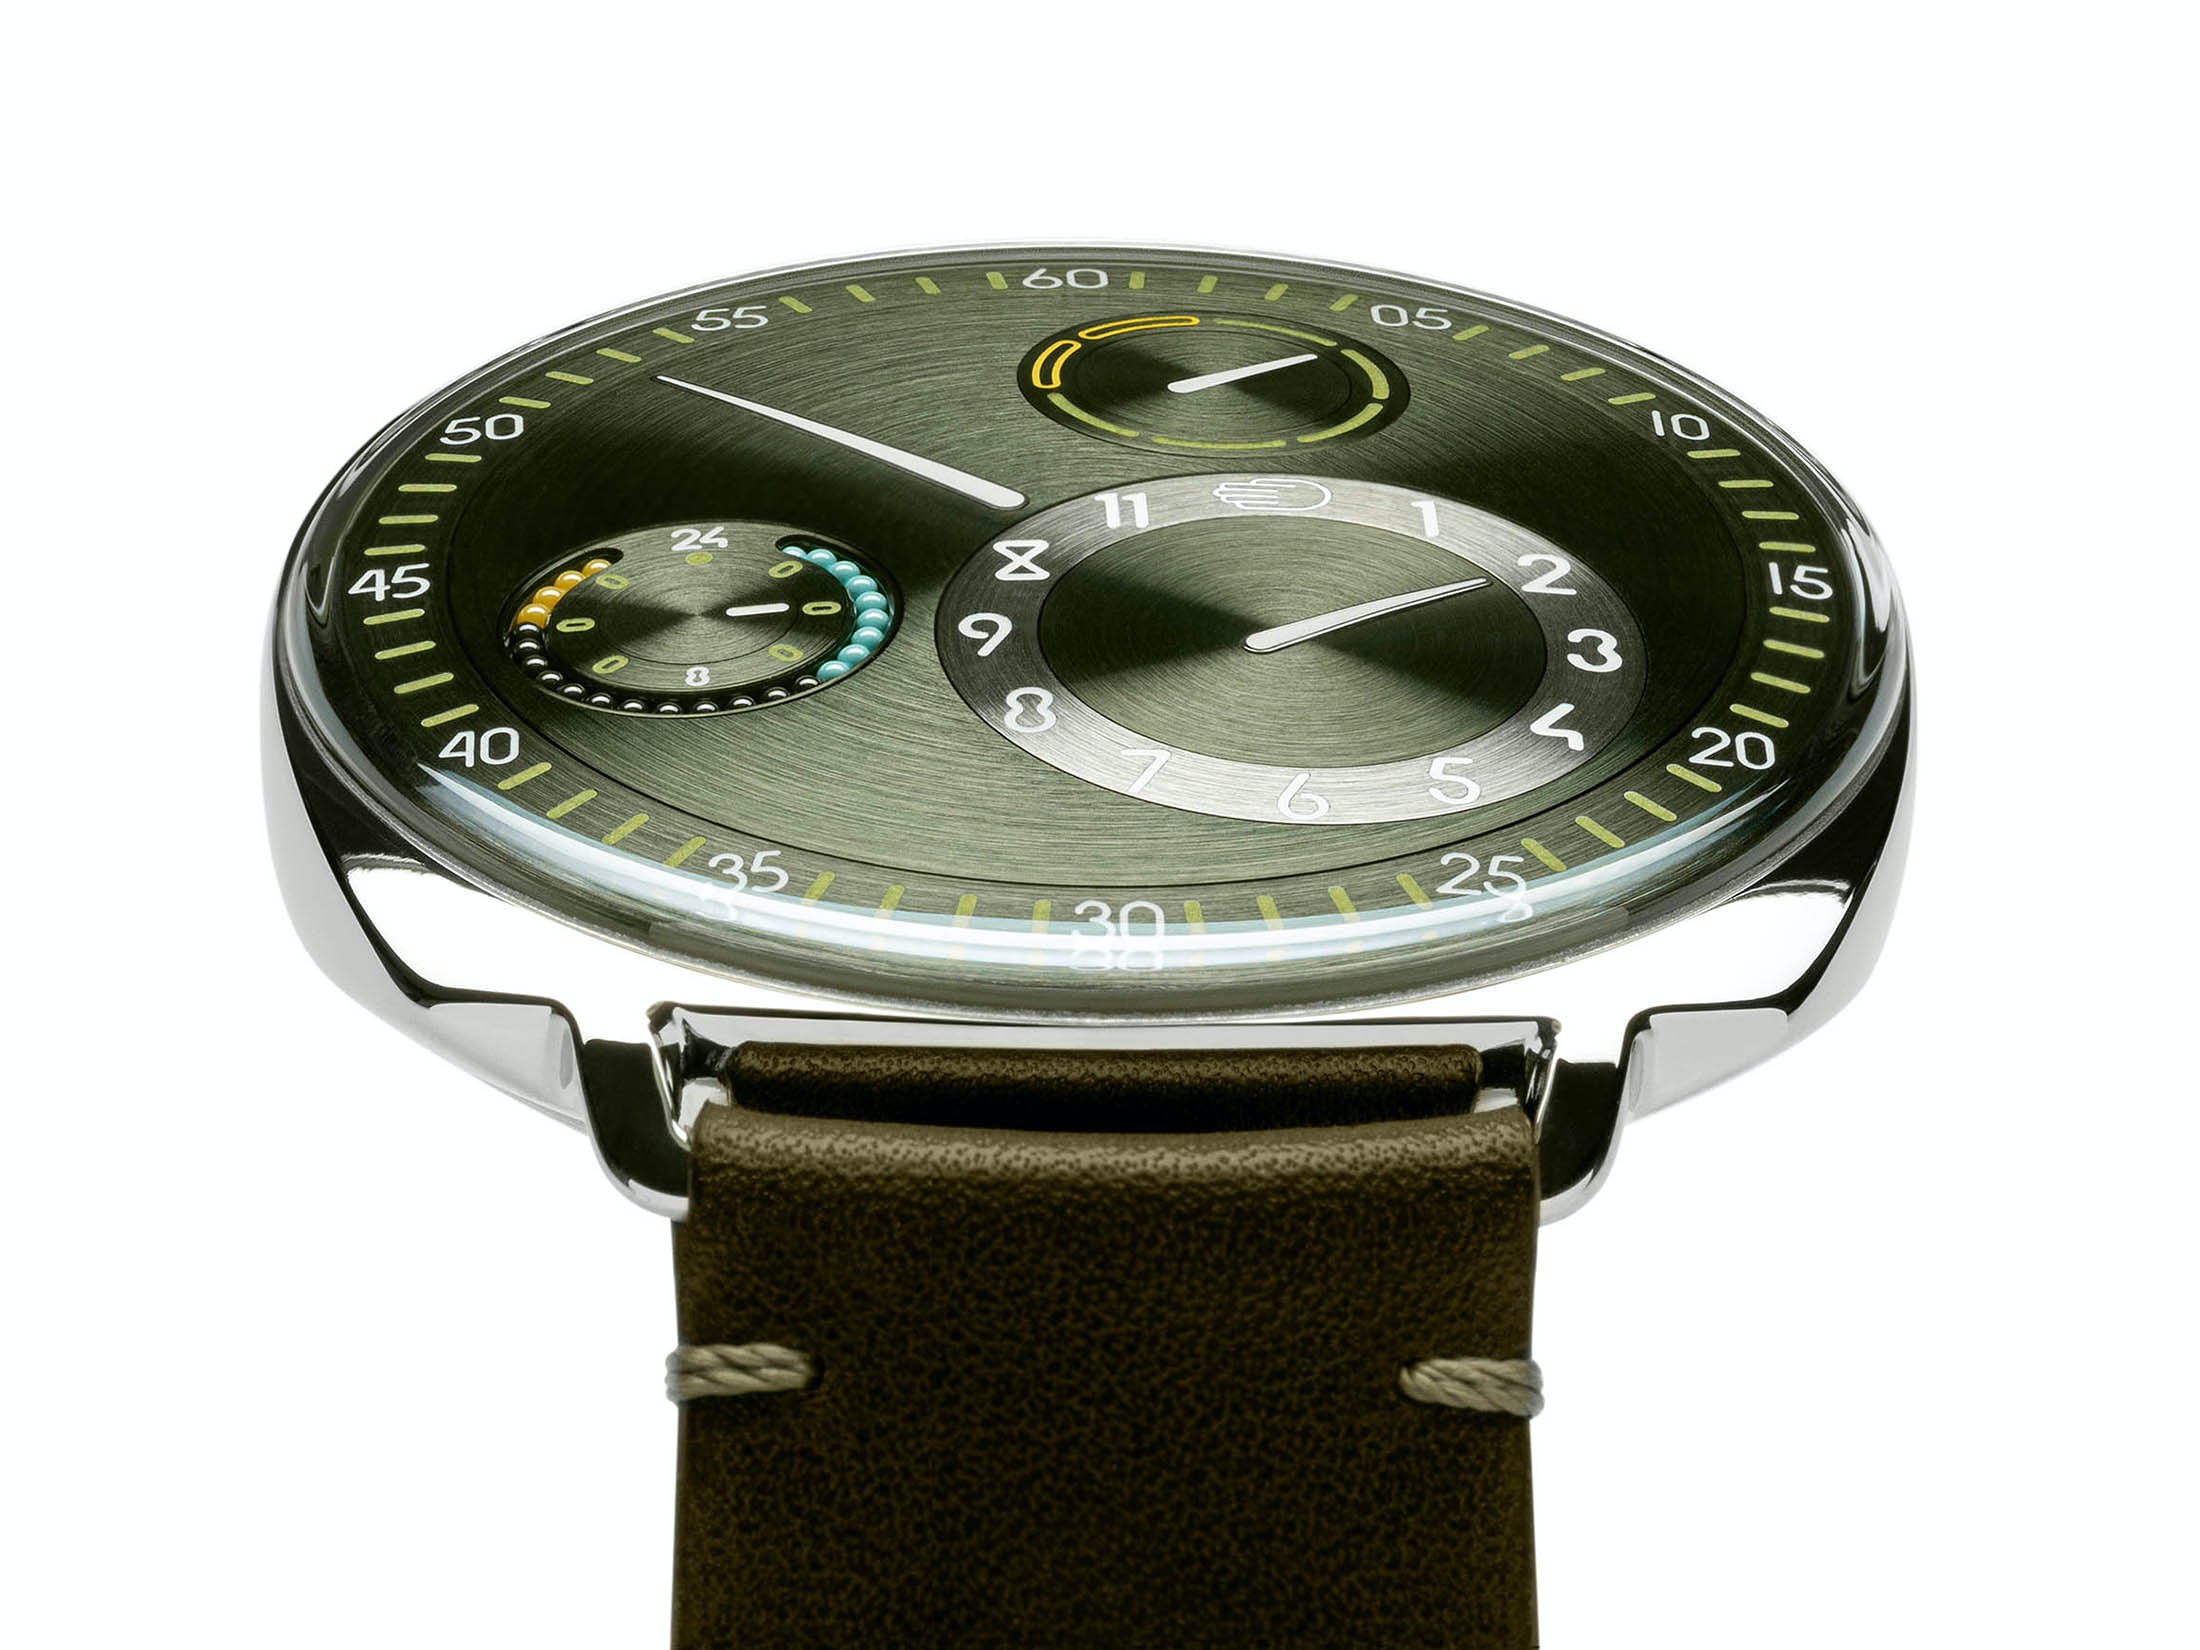 ressence adds multicolor discs to hours, minutes and seconds of its TYPE 1°  M watch